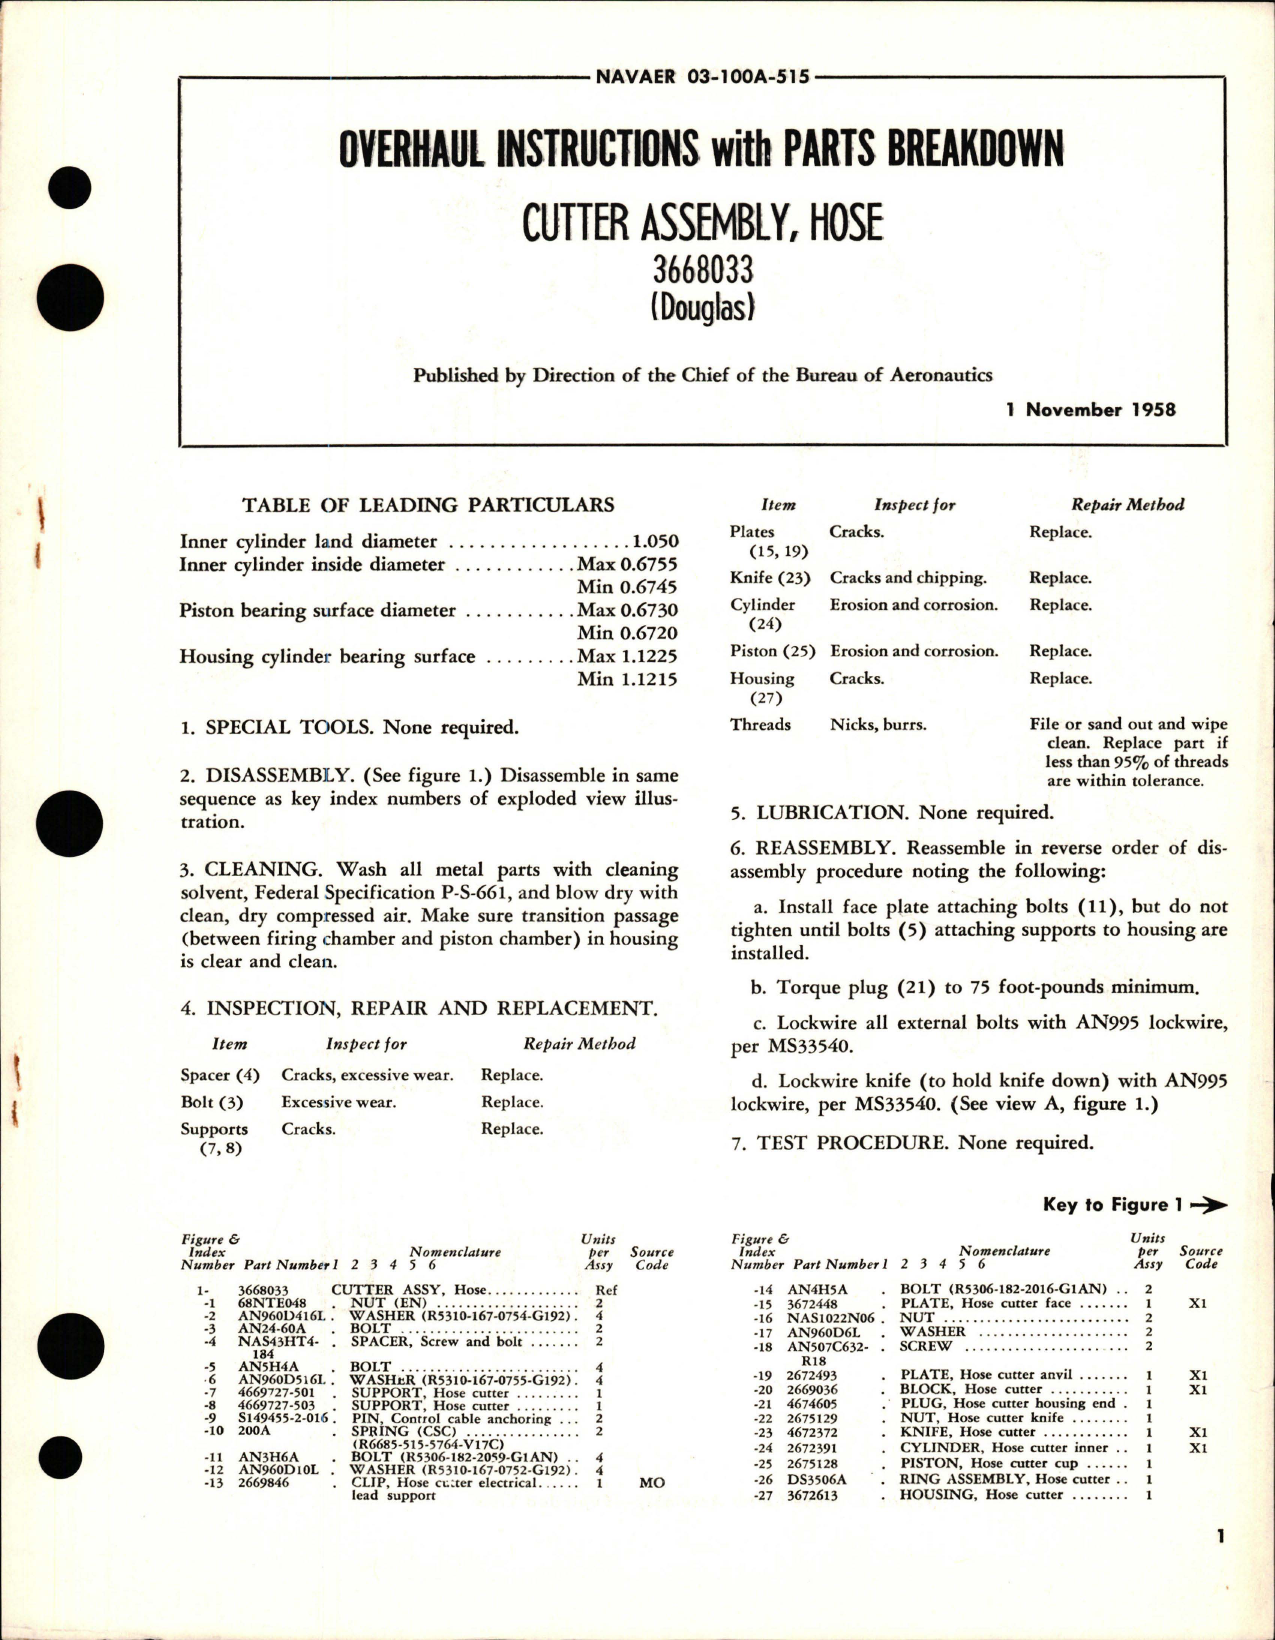 Sample page 1 from AirCorps Library document: Overhaul Instructions with Parts Breakdown for Hose Cutter Assembly - 3668033